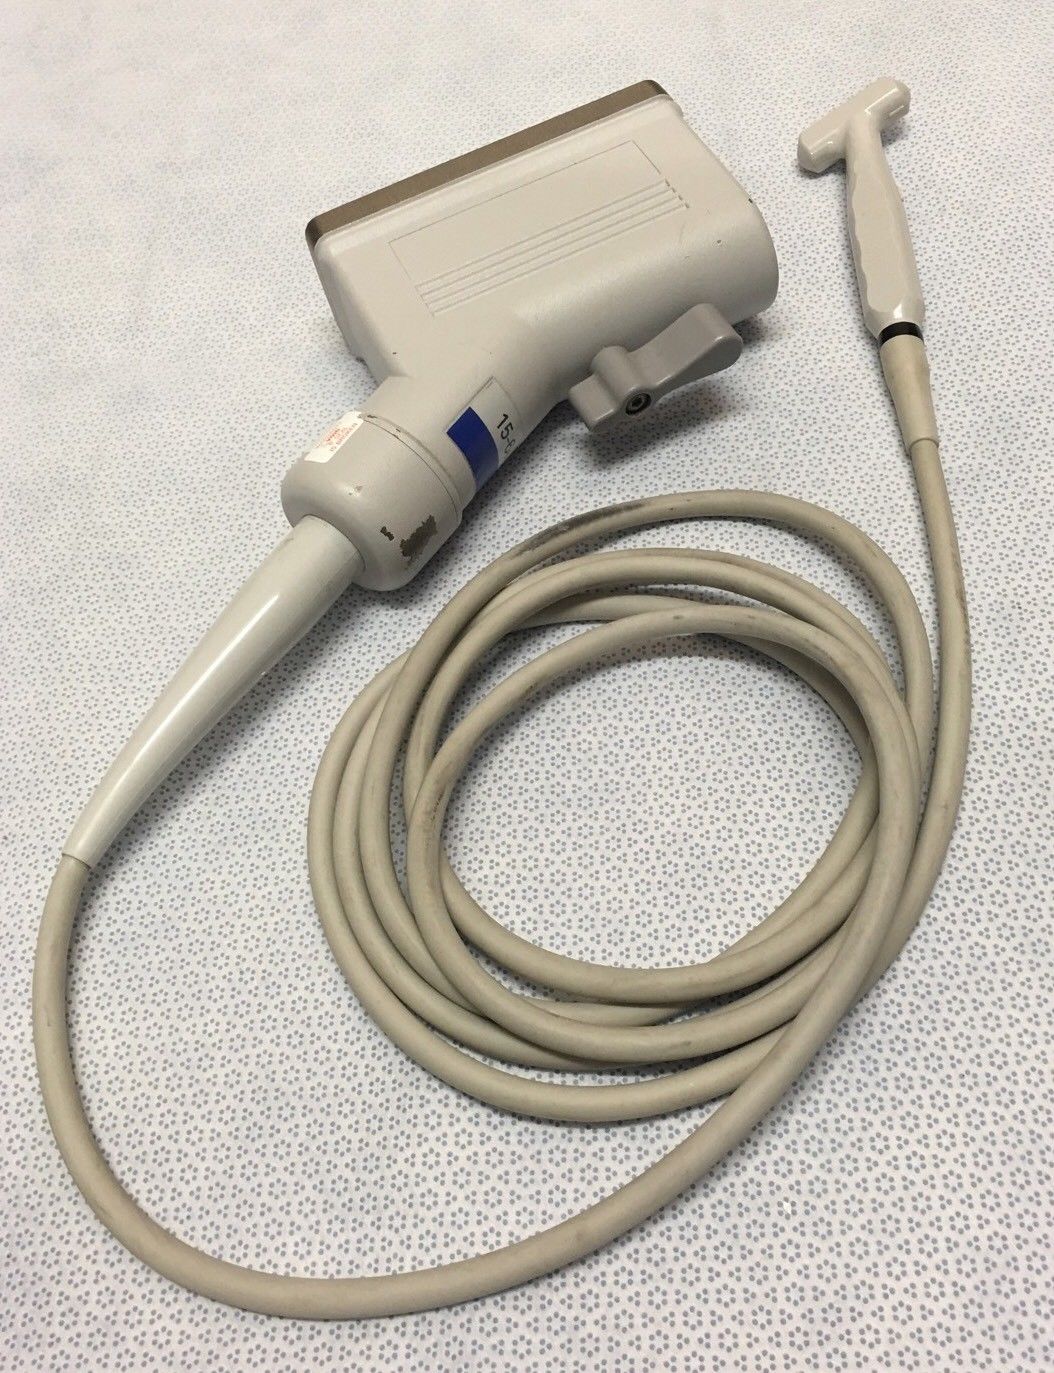 Philips 15-6L 21390A Compact Linear Array Probe for Sonos 5500 & Envisor 11408 DIAGNOSTIC ULTRASOUND MACHINES FOR SALE